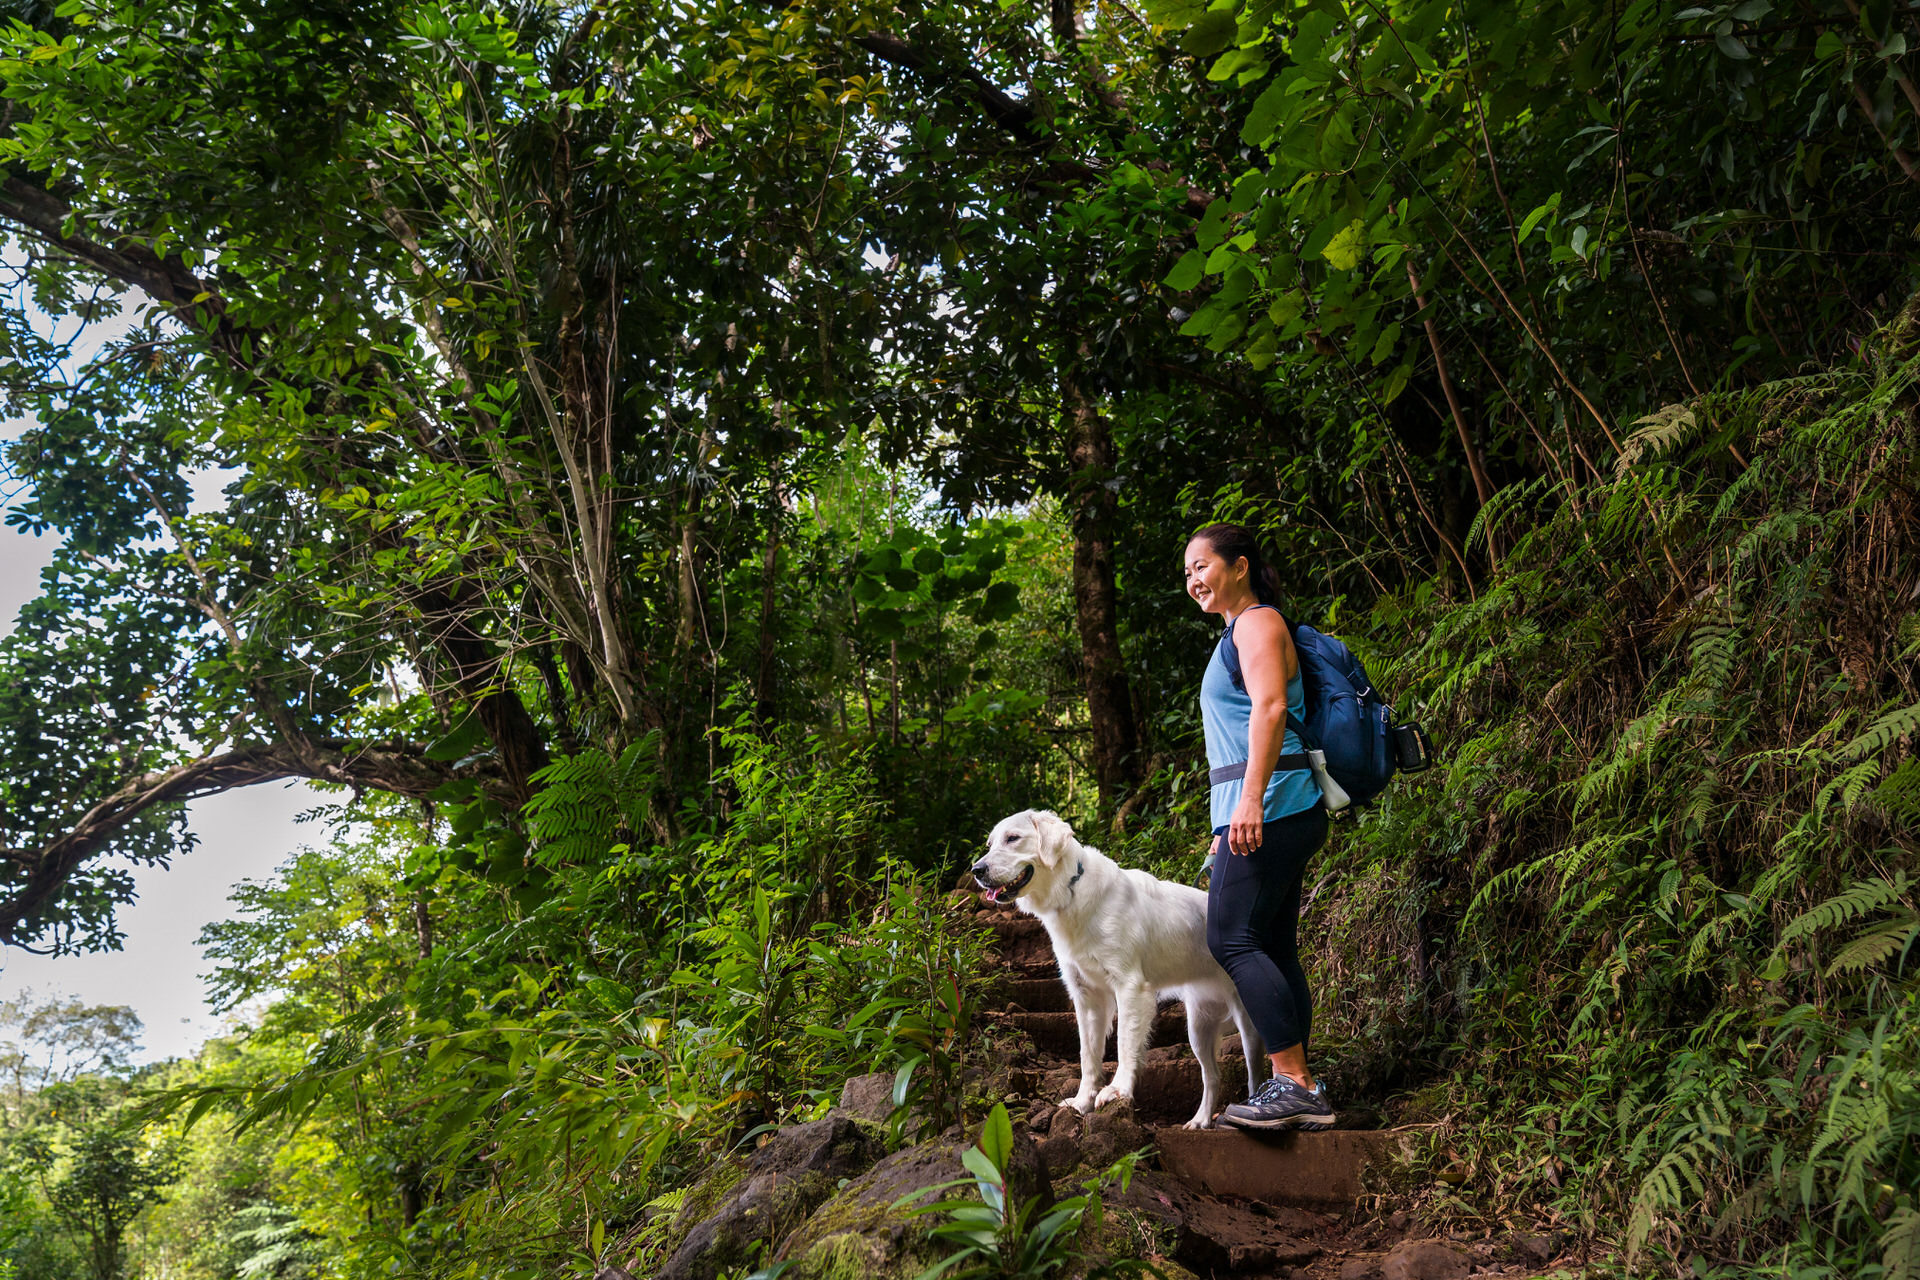 Woman and dog hiking in lush forest.